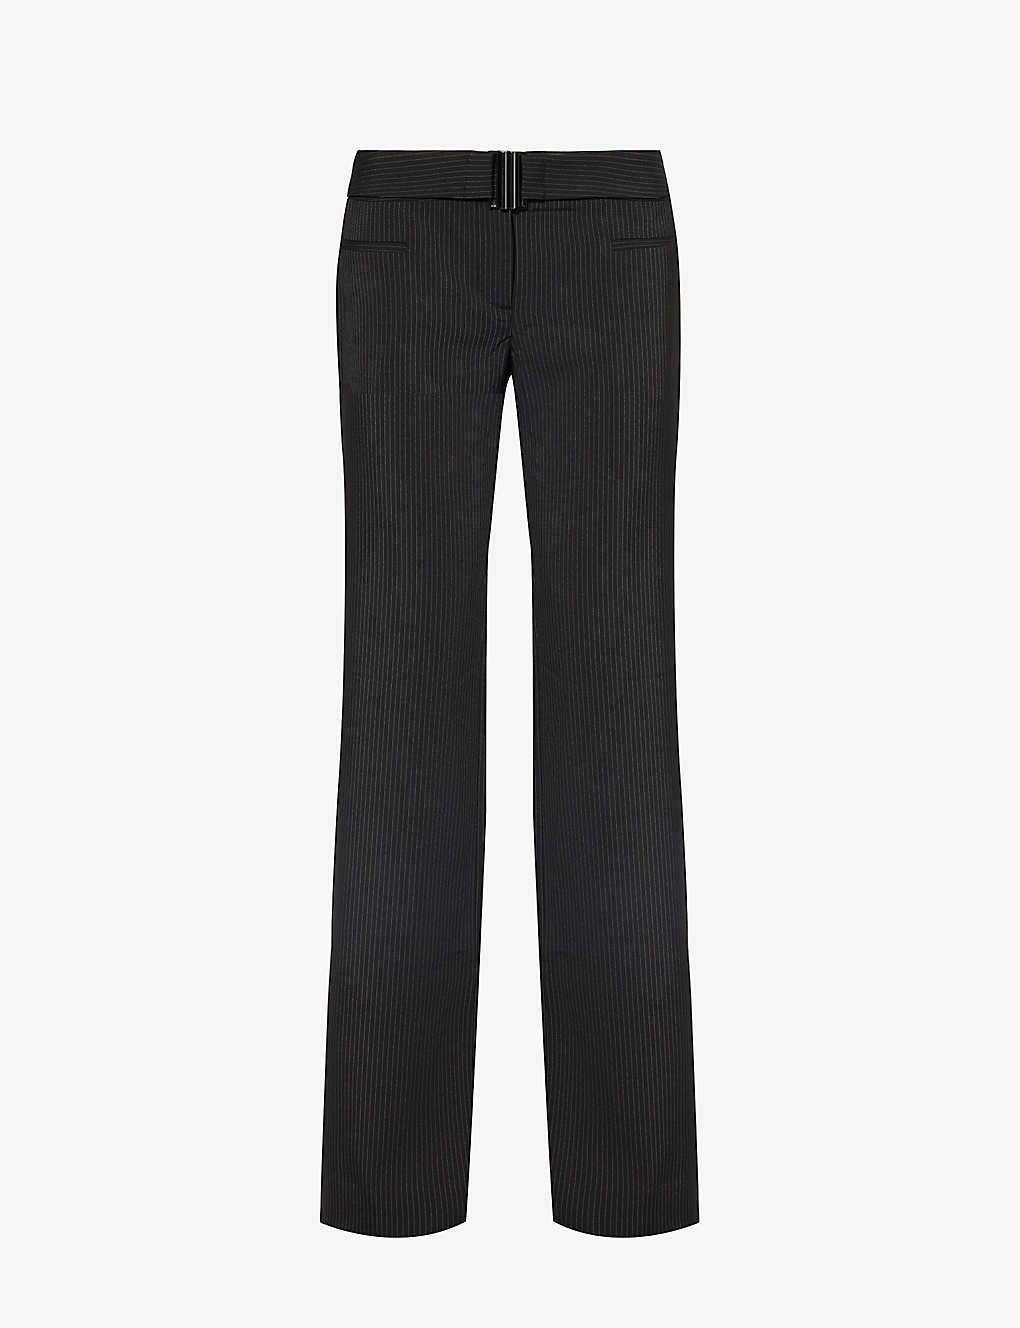 Reformation Womens Black Pinstripe Cherie Mid-rise Straight-leg Stretch-woven Trousers